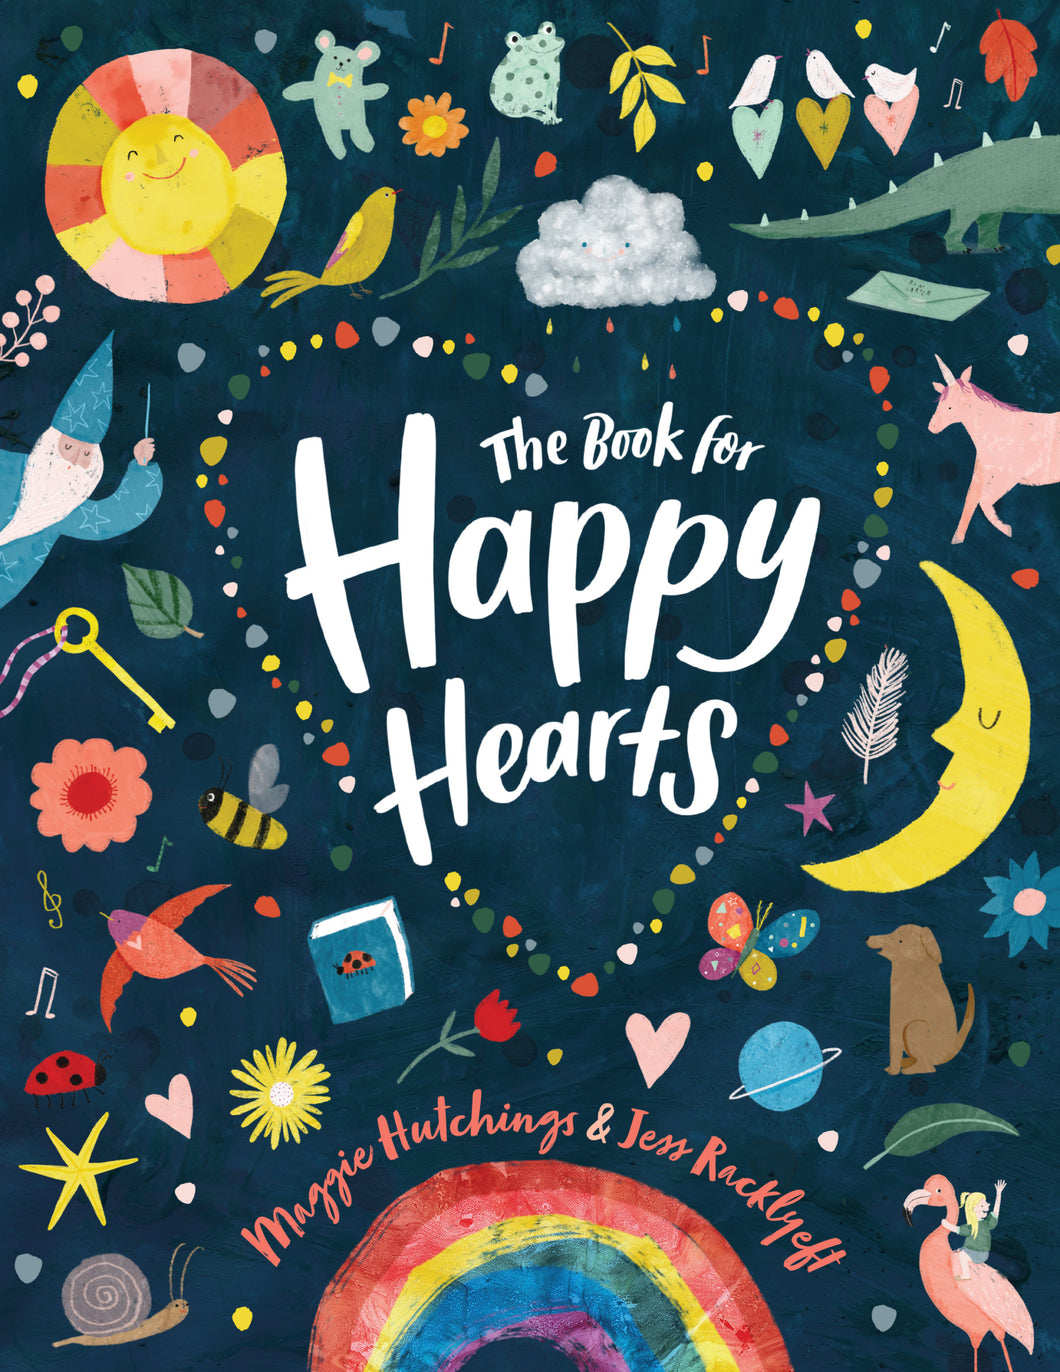 The Book for Happy Hearts by Maggie Hutchings and Jess Racklyeft